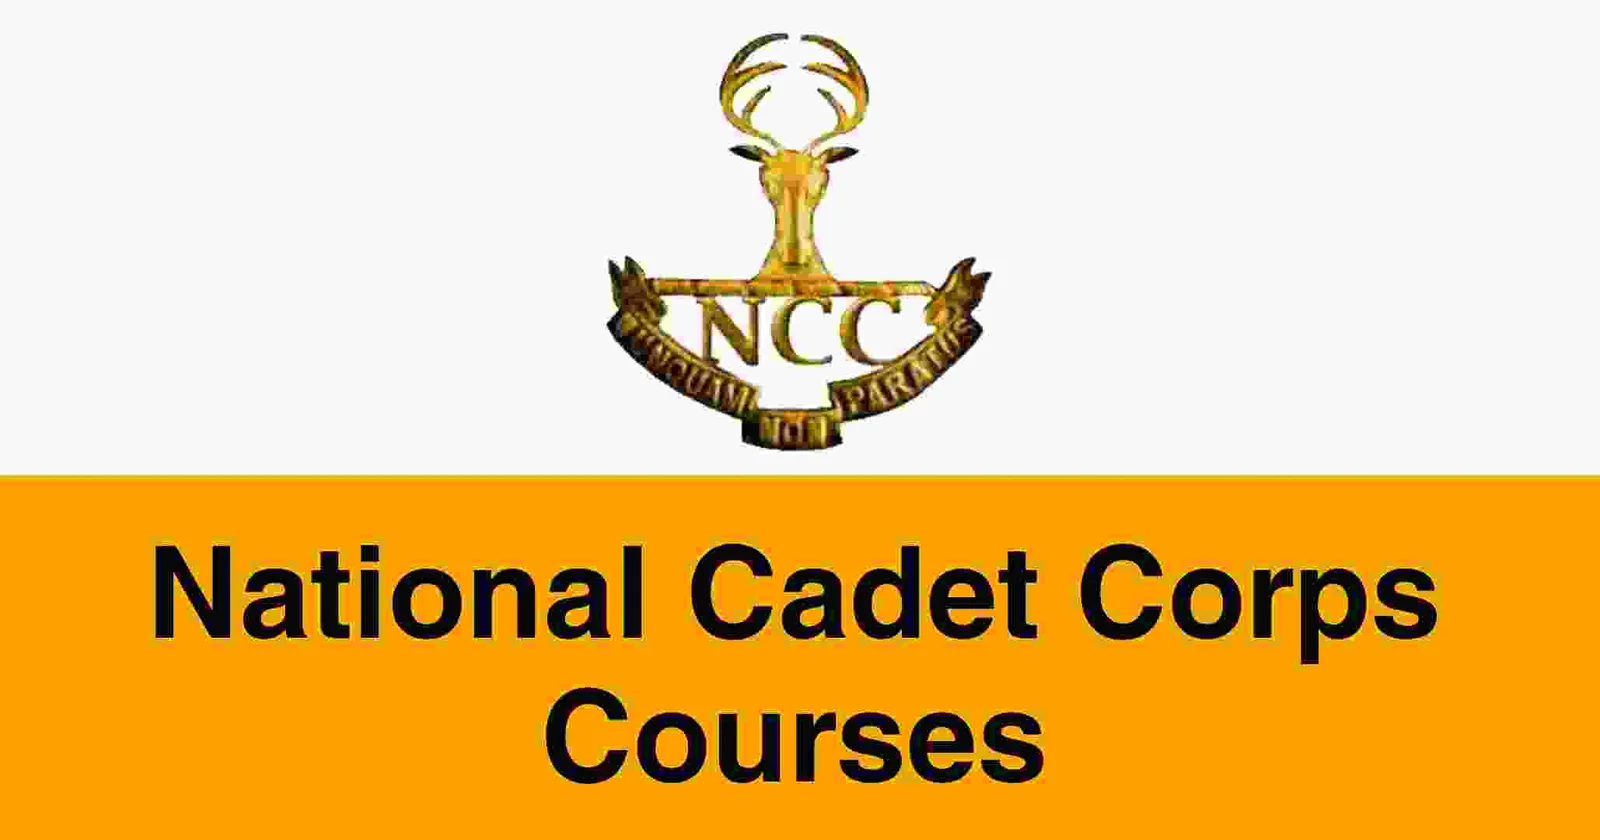 National Cadet Corps Courses